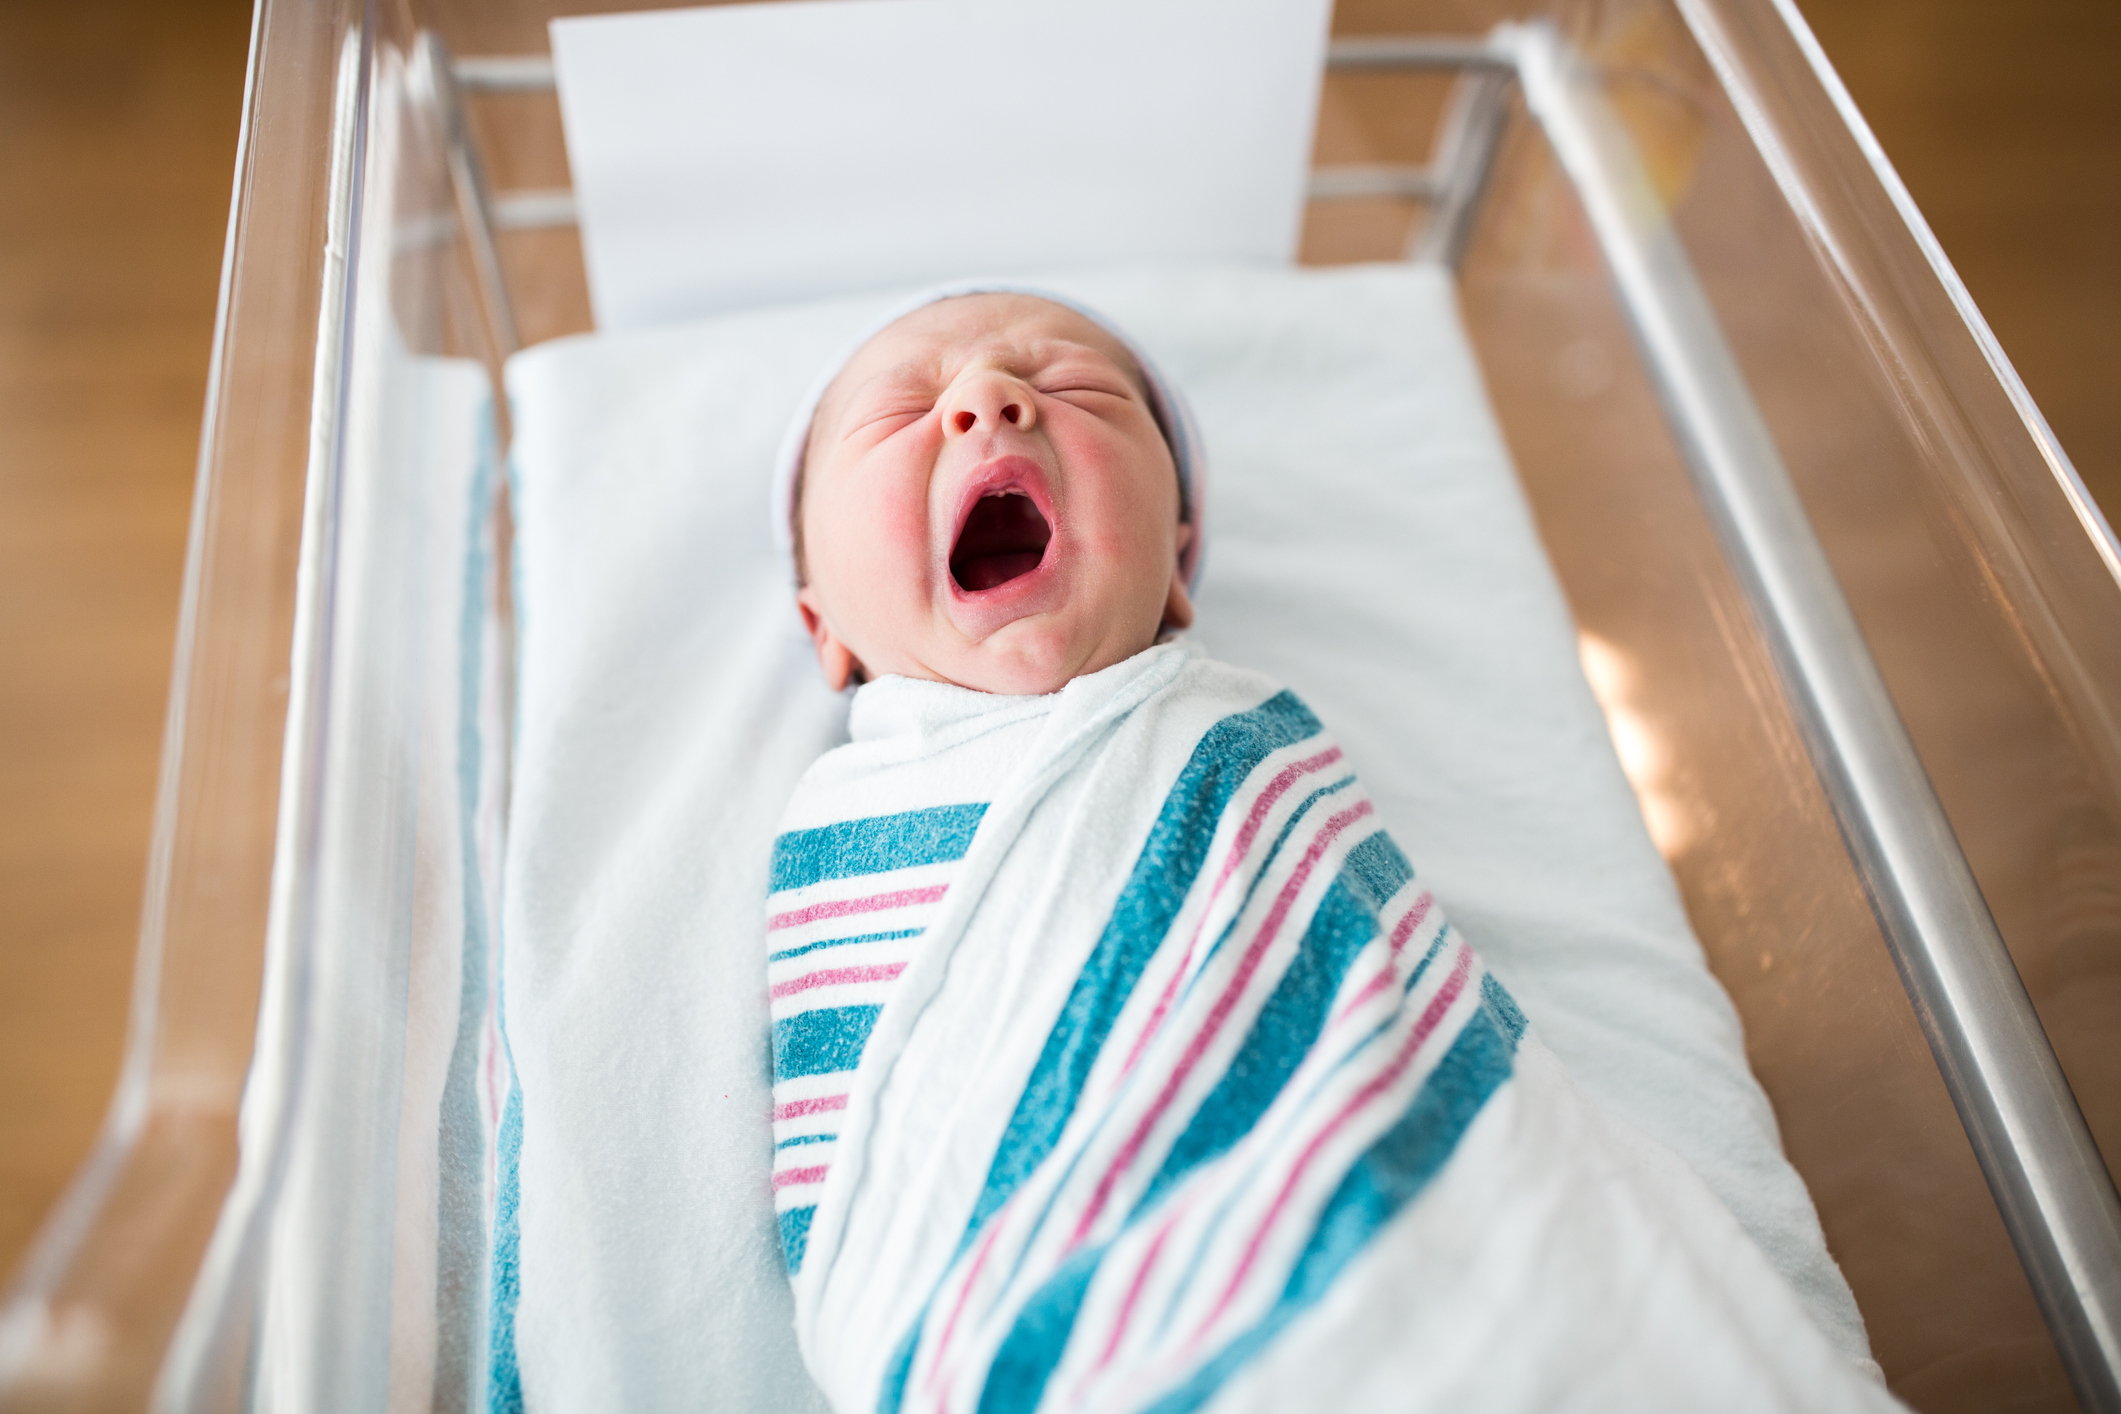 Newborn baby yawning while swaddled in a striped blanket in a hospital bassinet